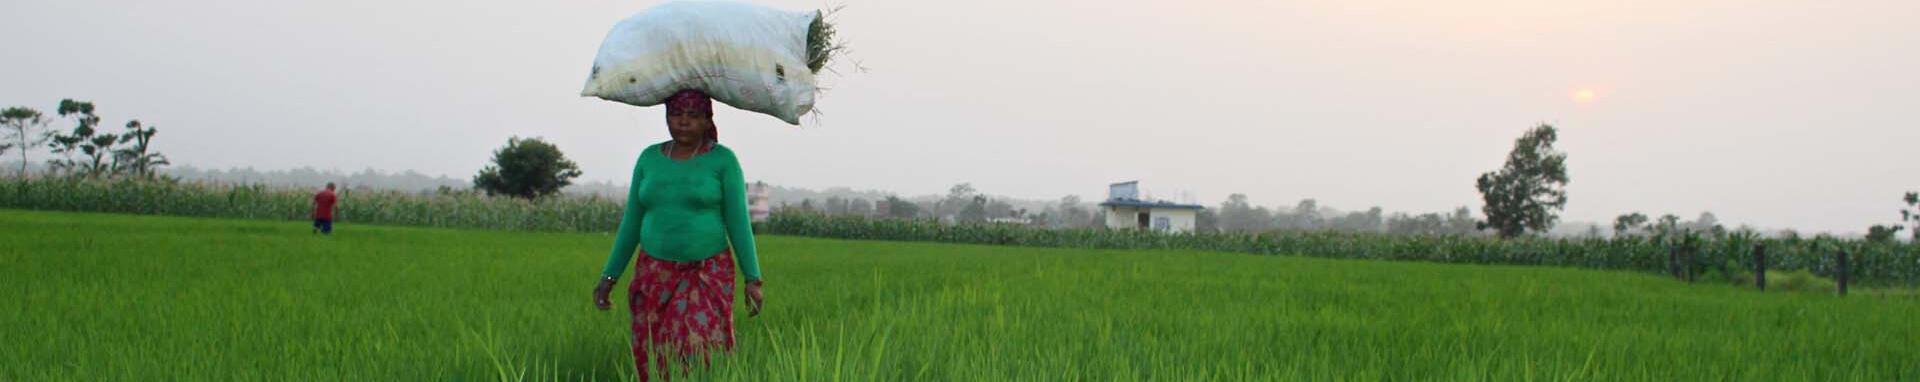 CIF Action Woman in field, Chitwan province, Nepal. Photo Credit - Naresh Newar/Thomson Reuters Foundation